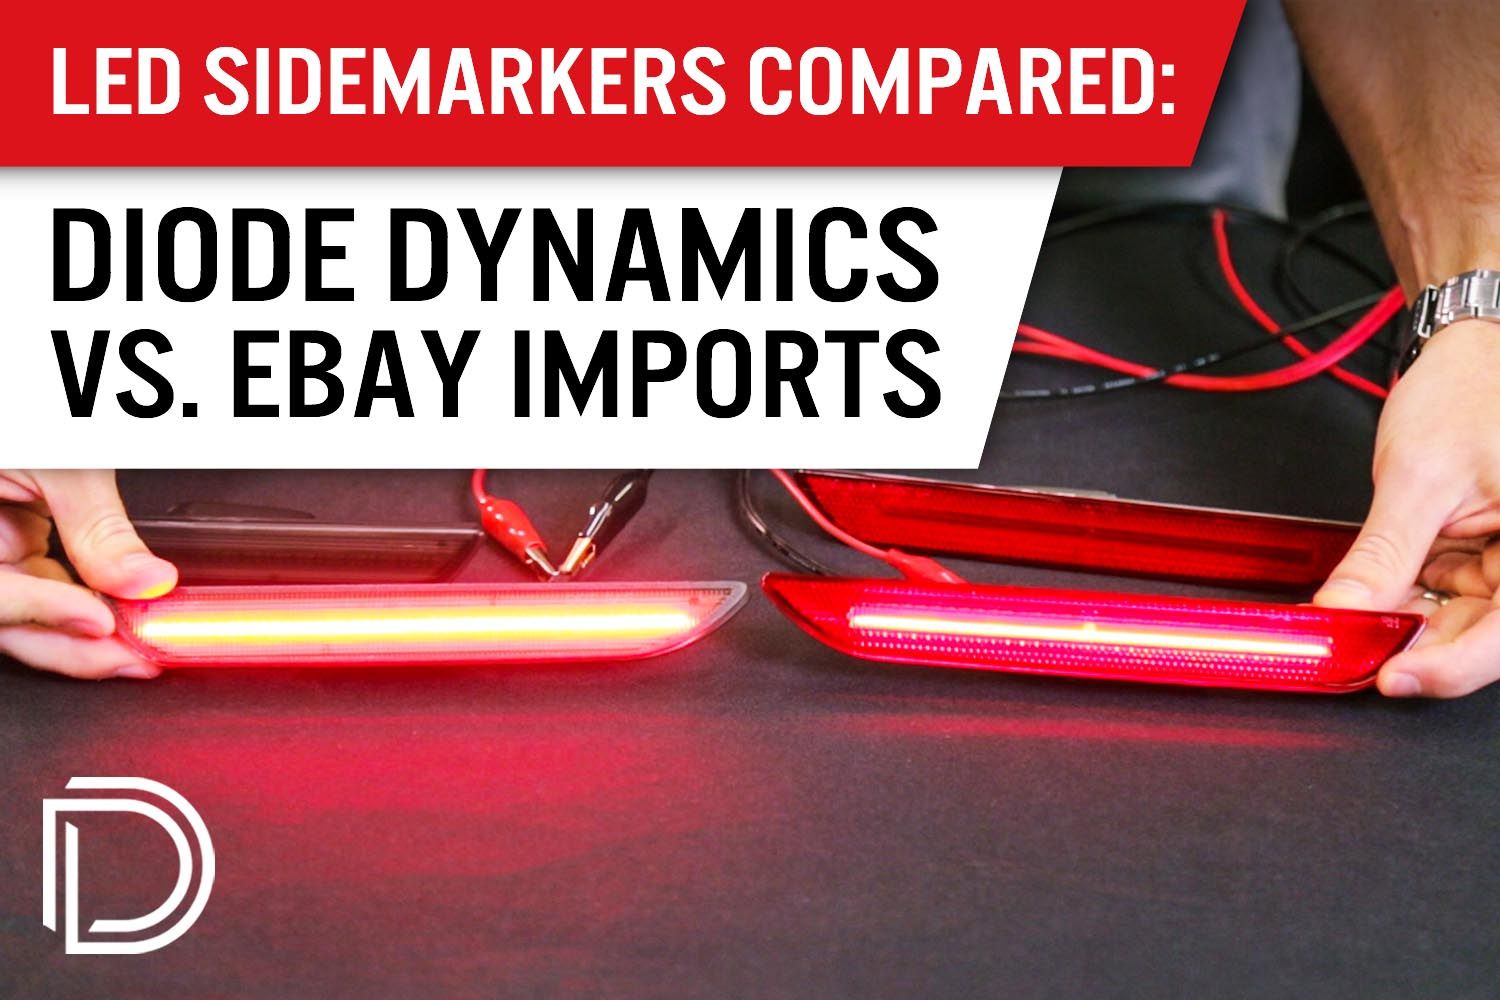 LED Sidemarkers Compared: Diode Dynamics vs eBay Imports